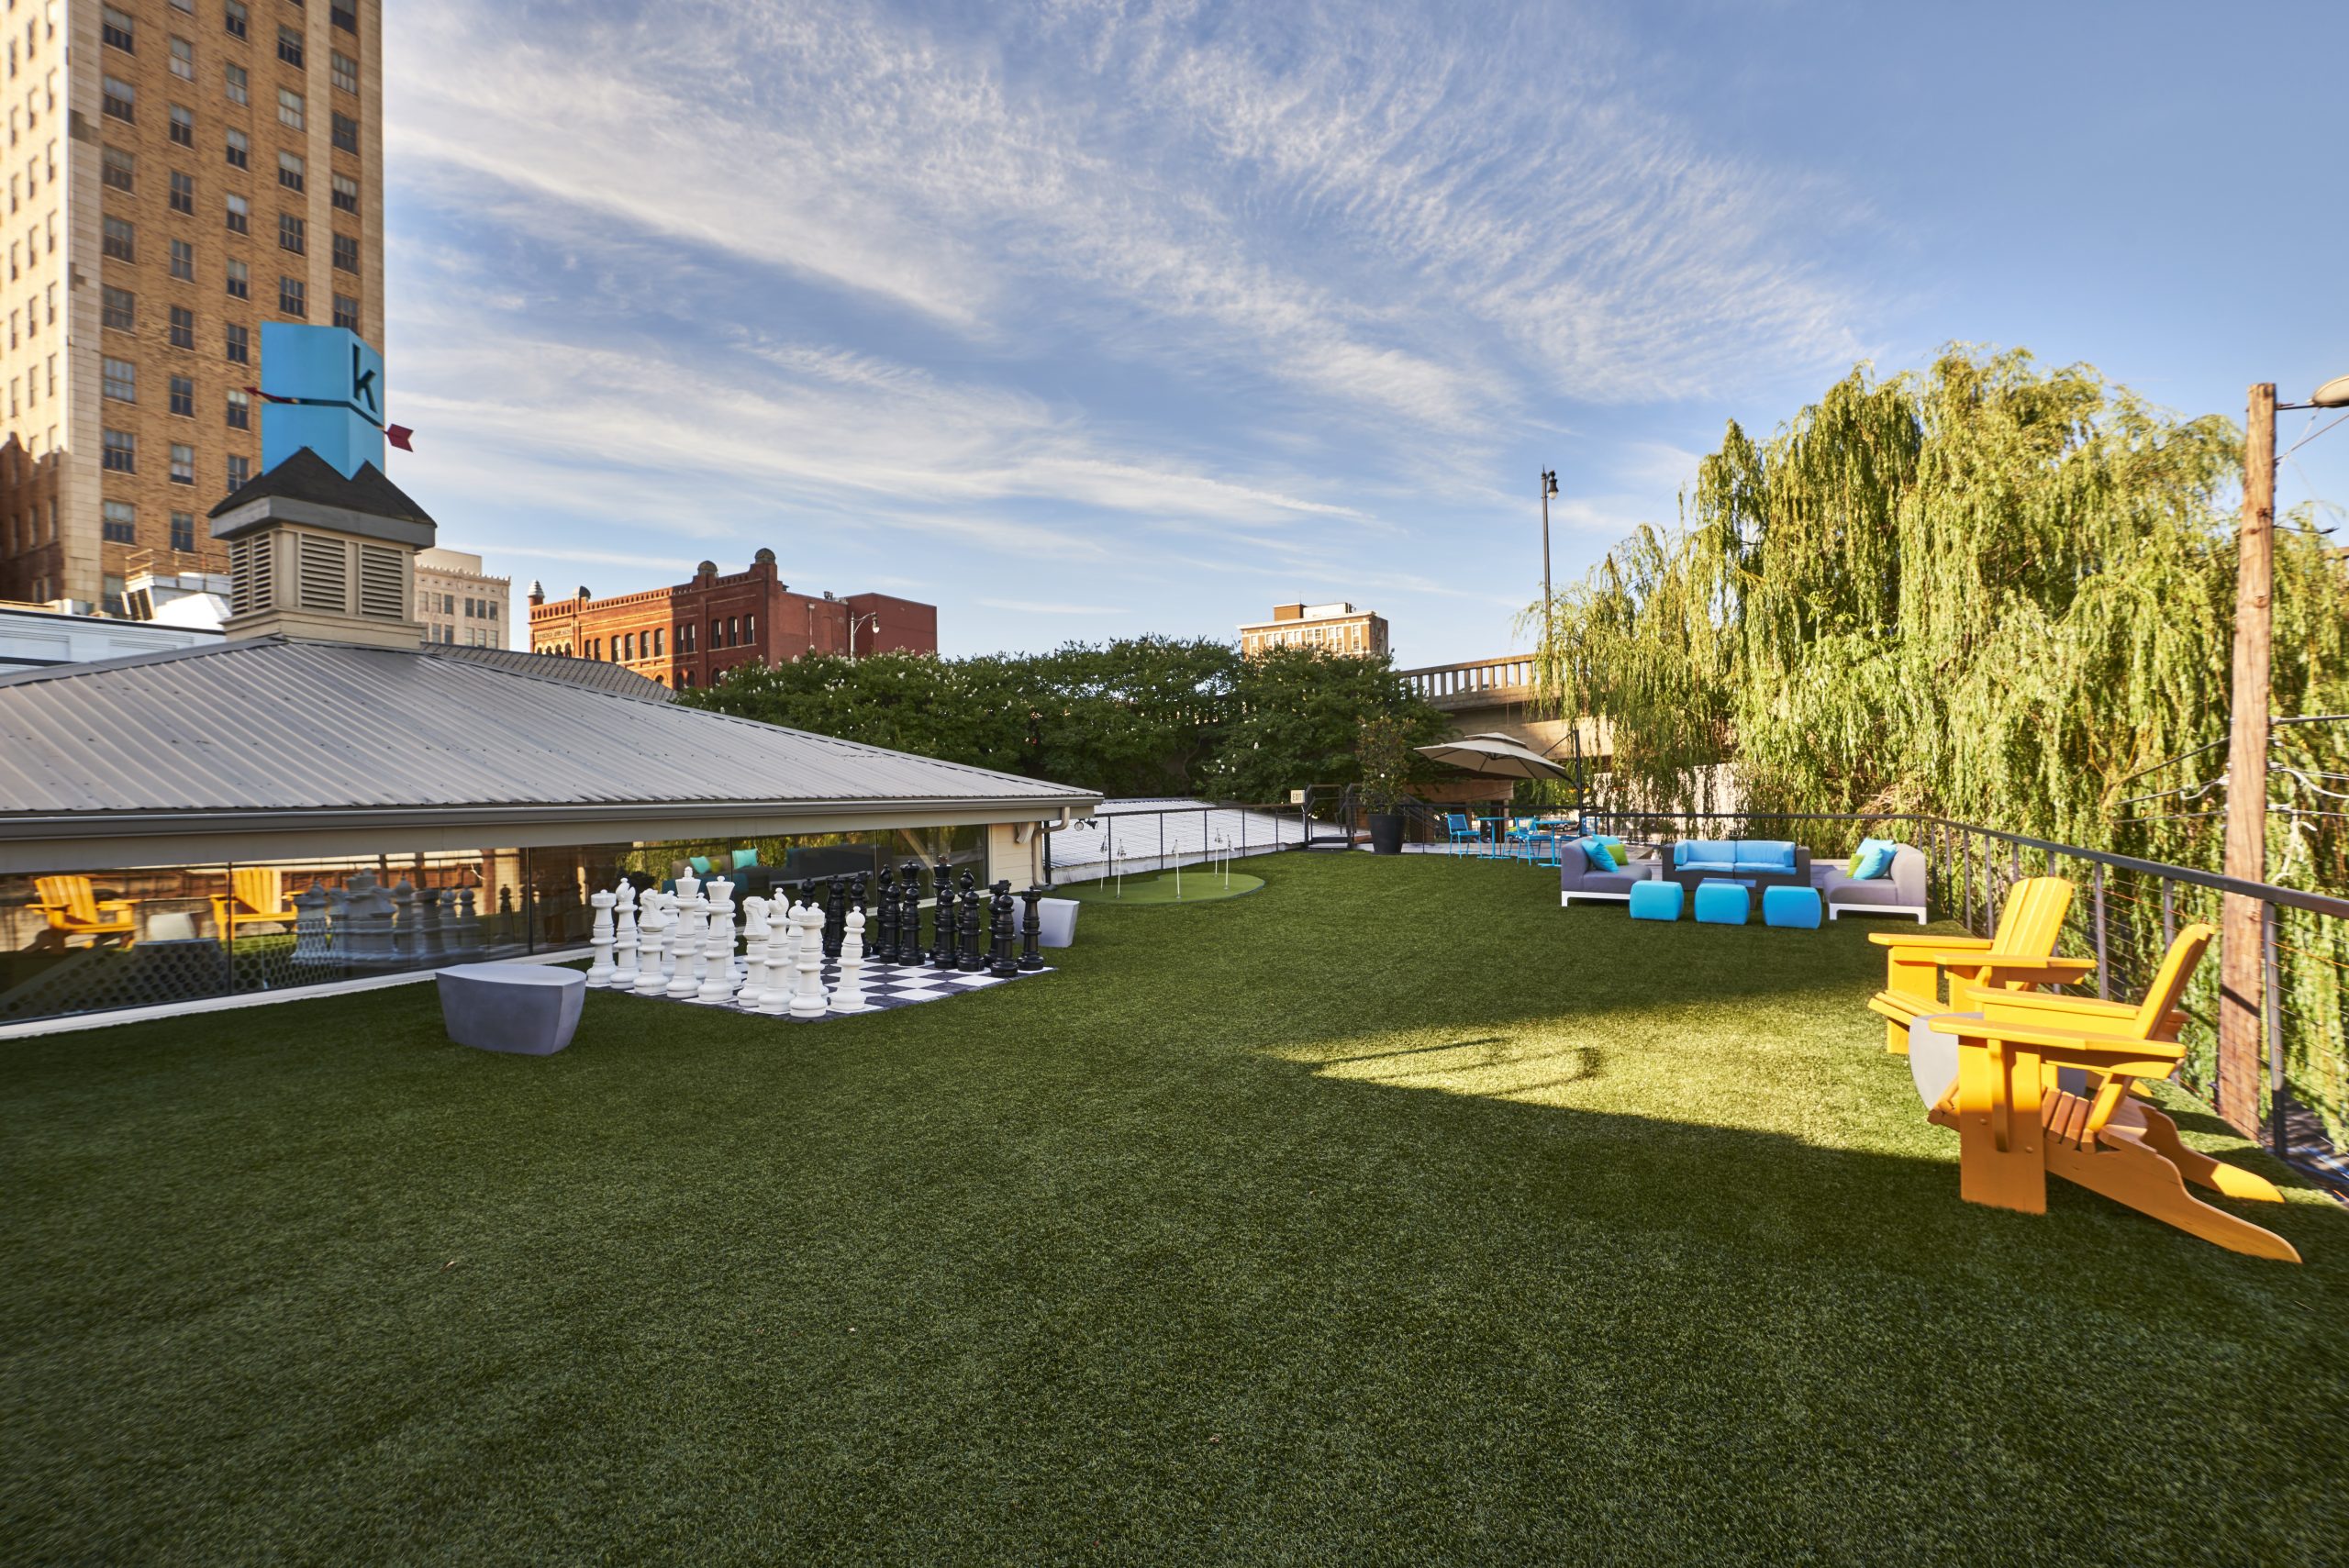 Photo of the Kinetic's astroturf rooftop area complete with chairs, couches, chees set, and golf green.